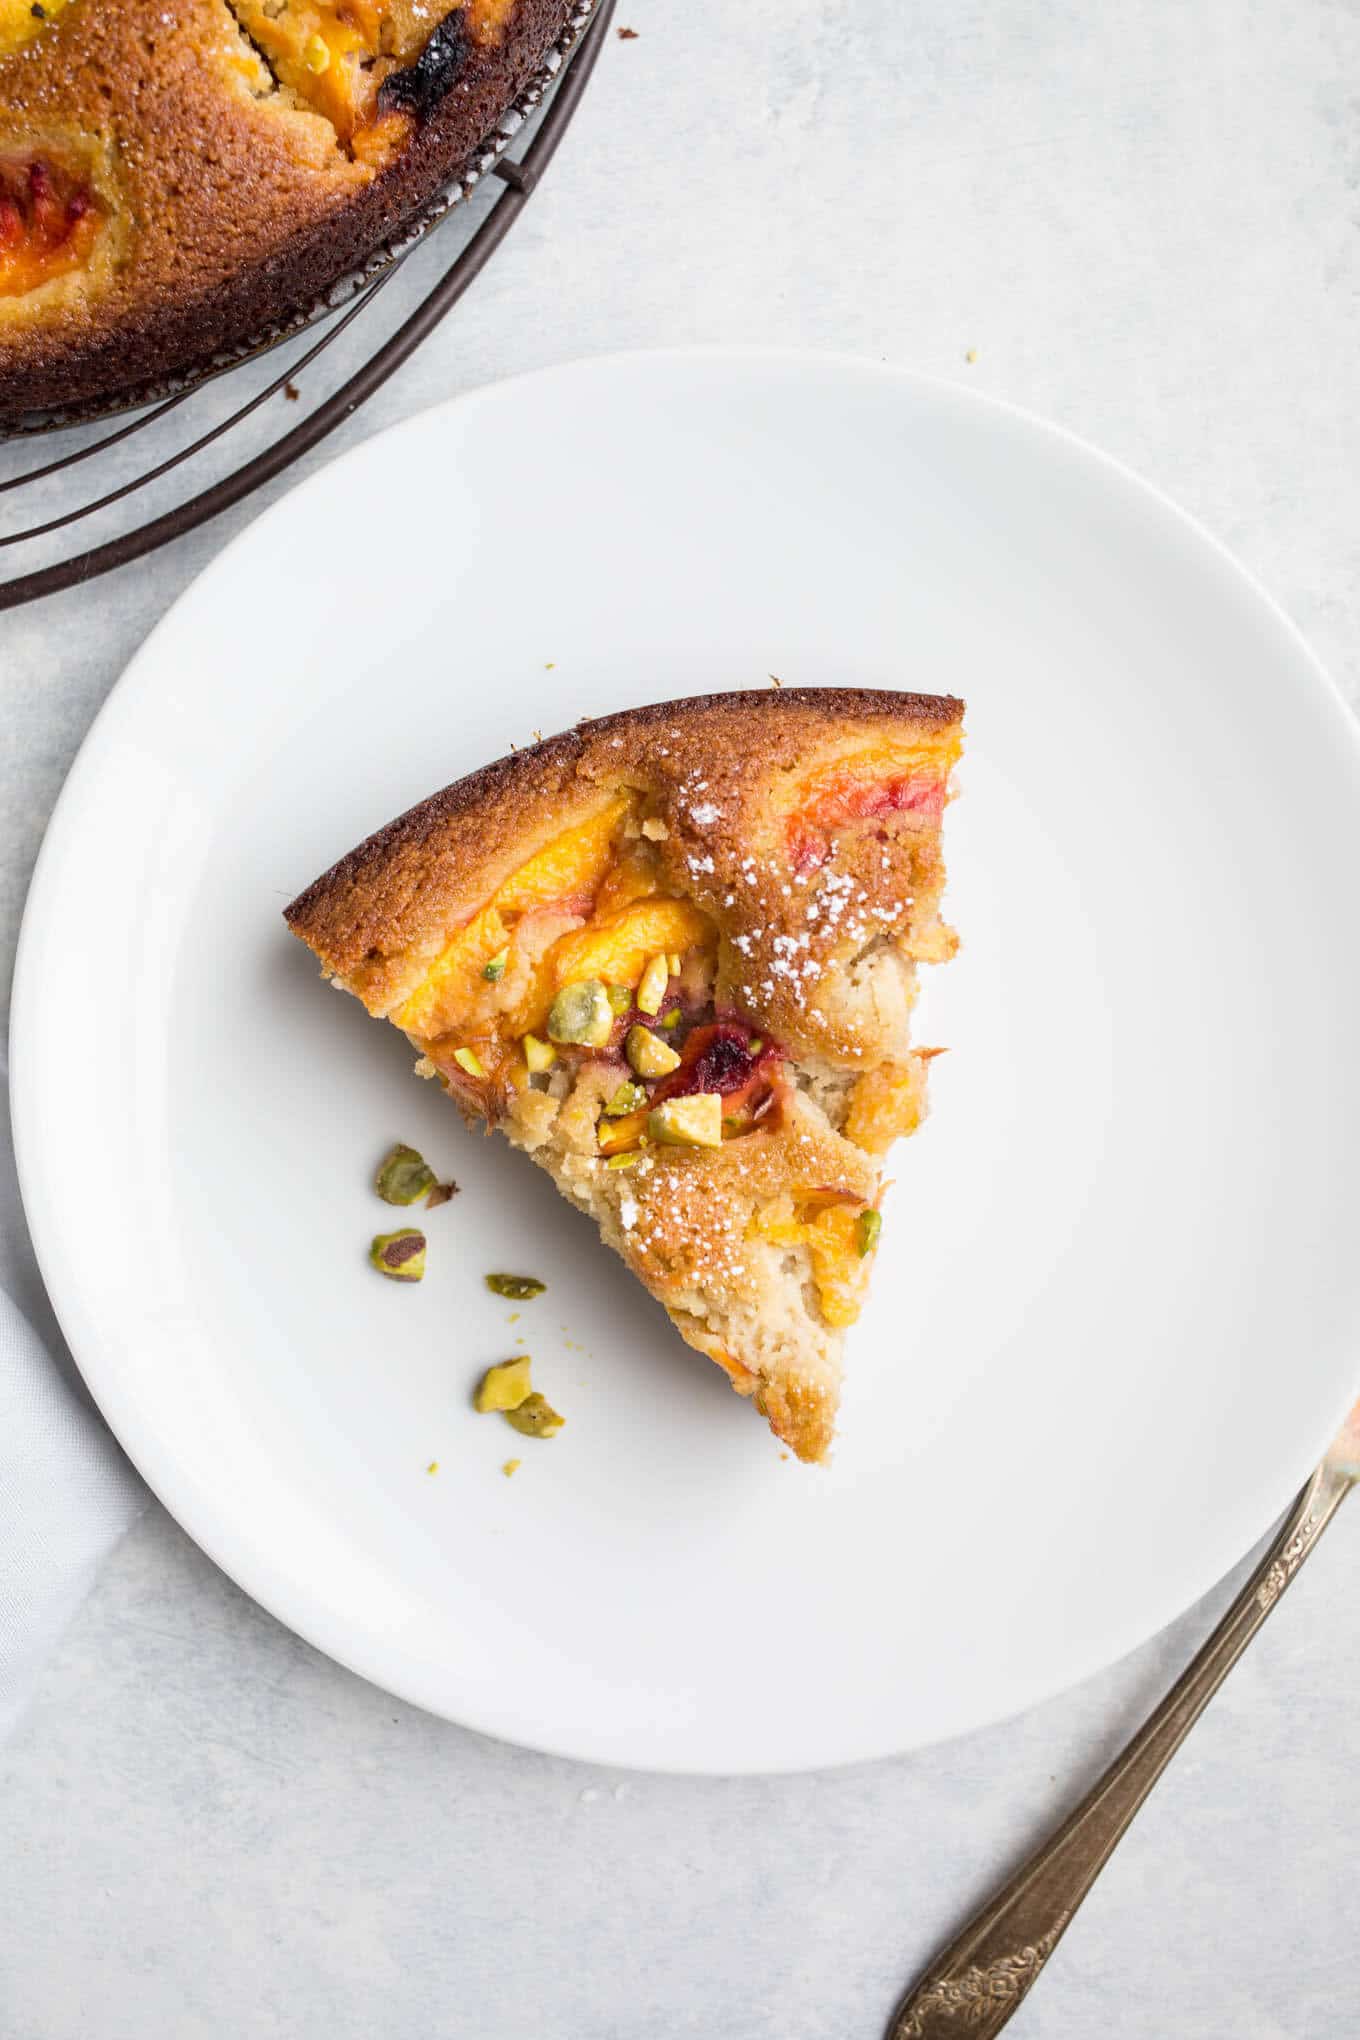 This deliciously moist Olive Oil Cake with Peaches made with almond flour and corn flour is a wholesome treat. Gluten-free, dairy-free, refined sugar-free.